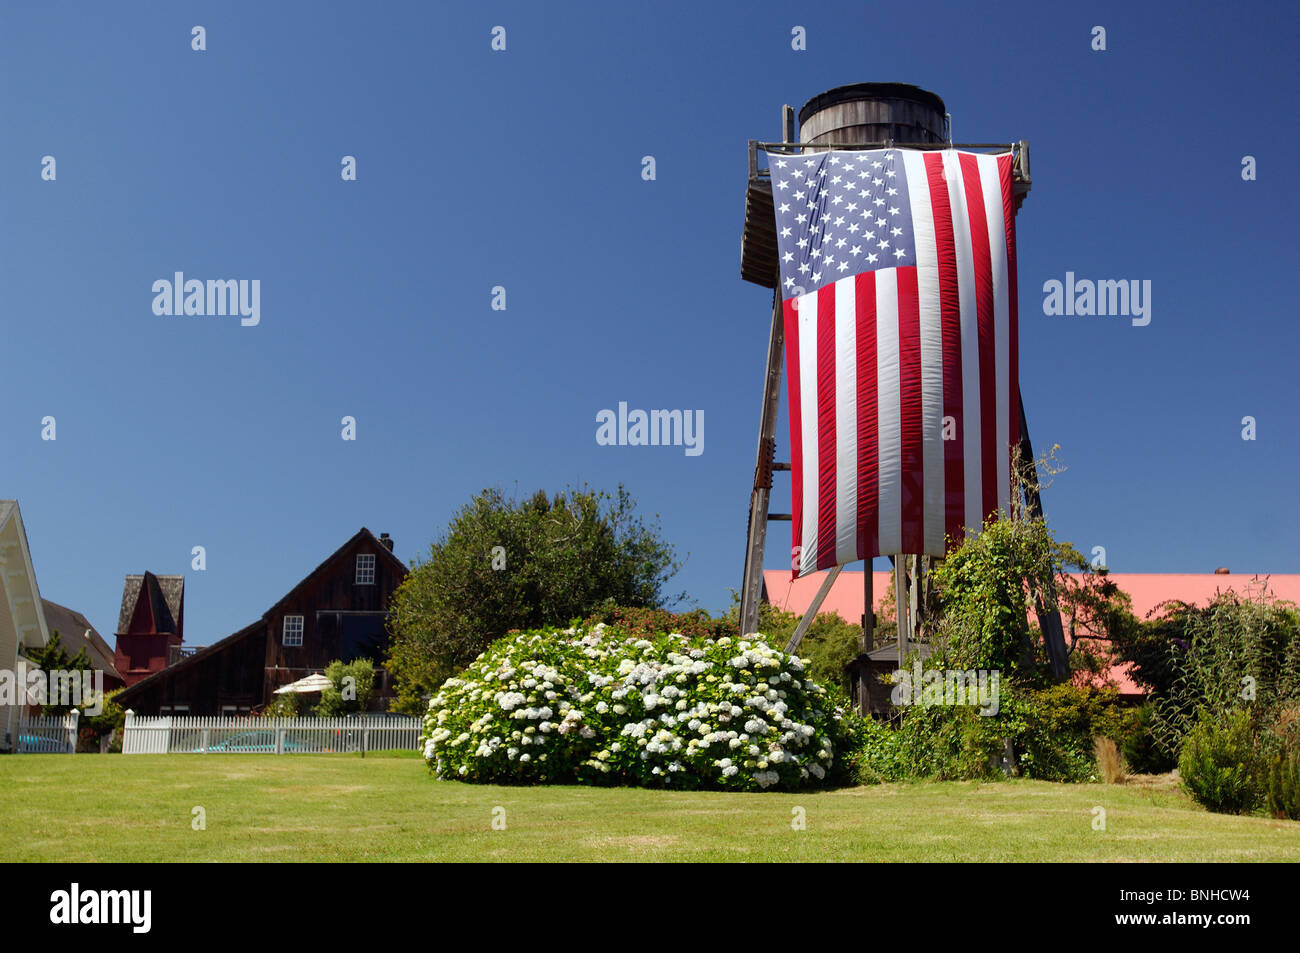 Usa Californie Mendocino American Flagg Water Tower Garden House Style Patriotique United States of America Banque D'Images